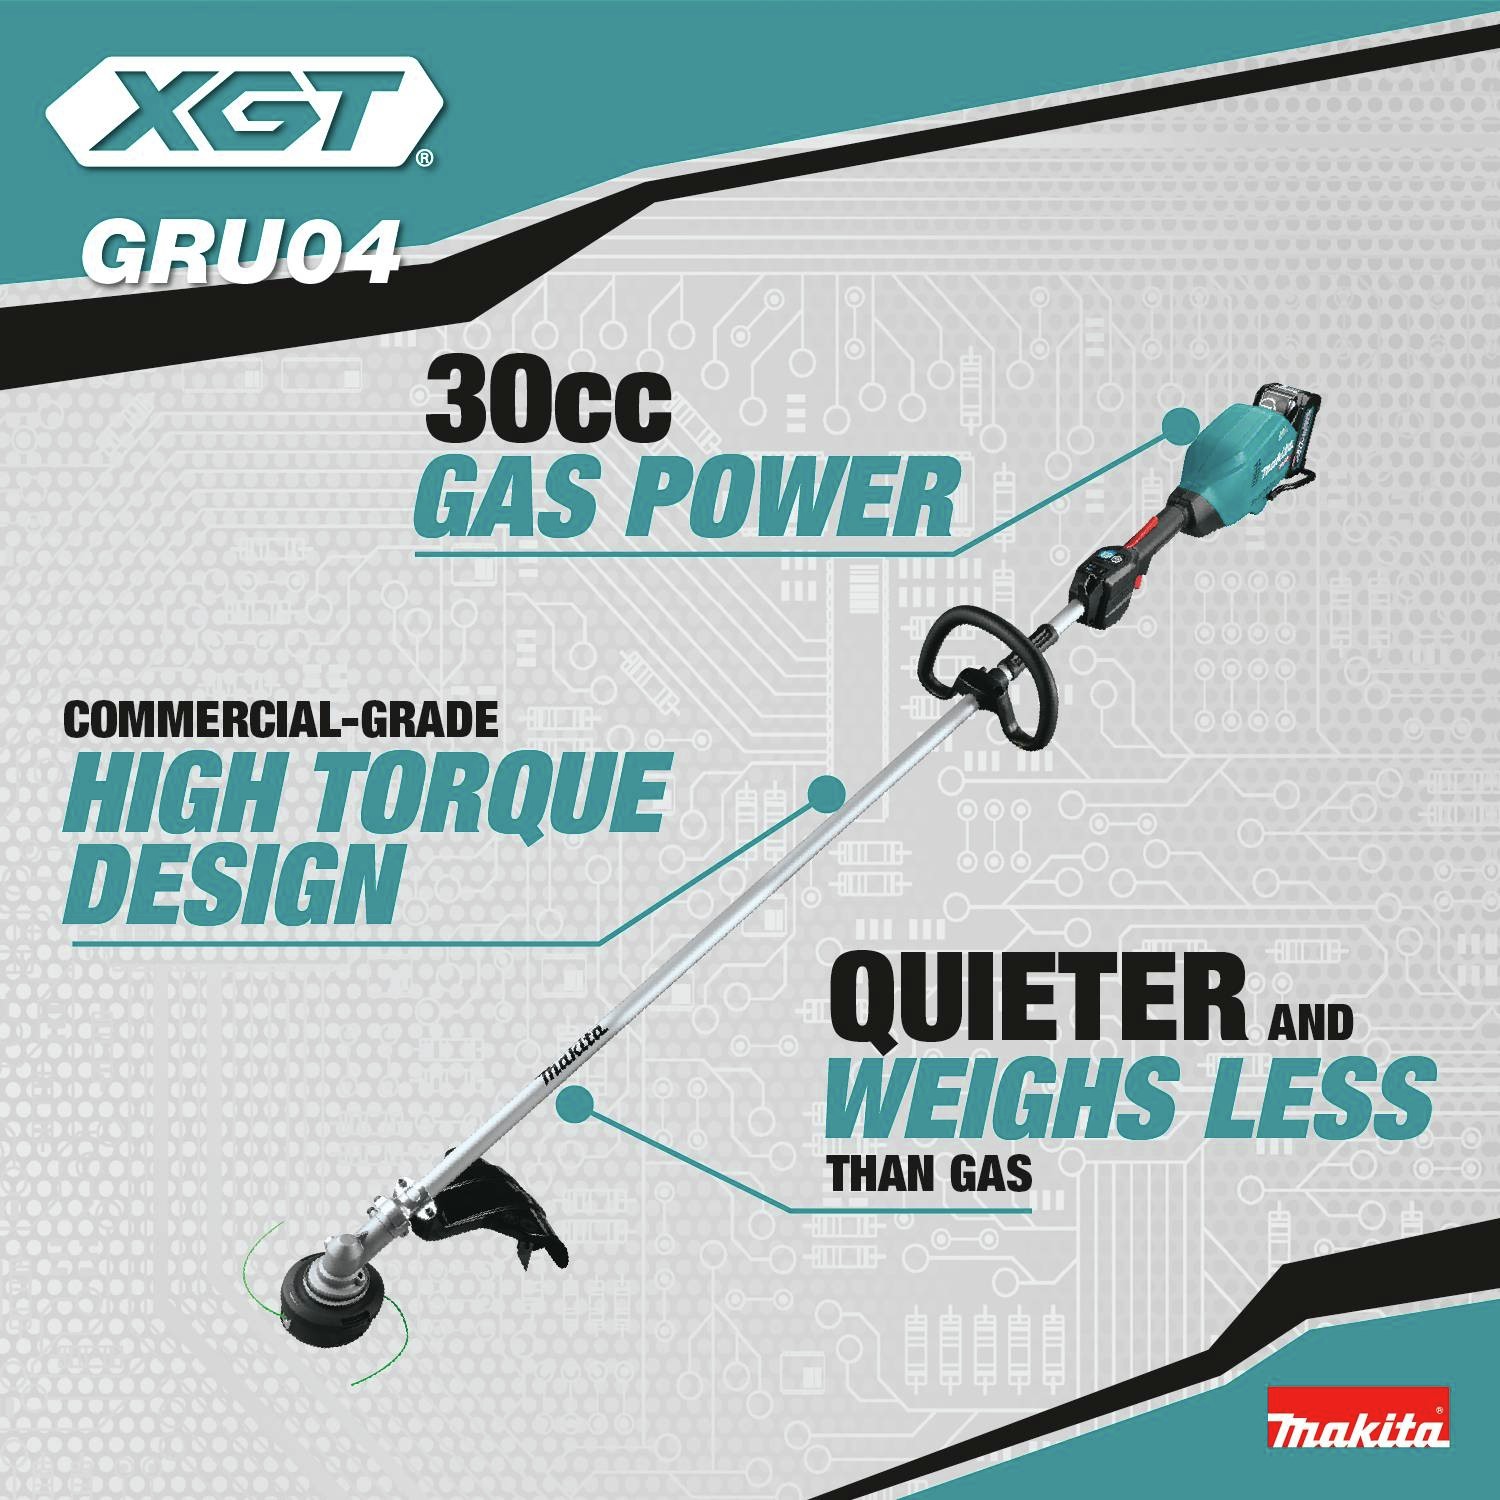 30cc gas power. Commercial grade high torque design. Quieter and weighs less than gas.